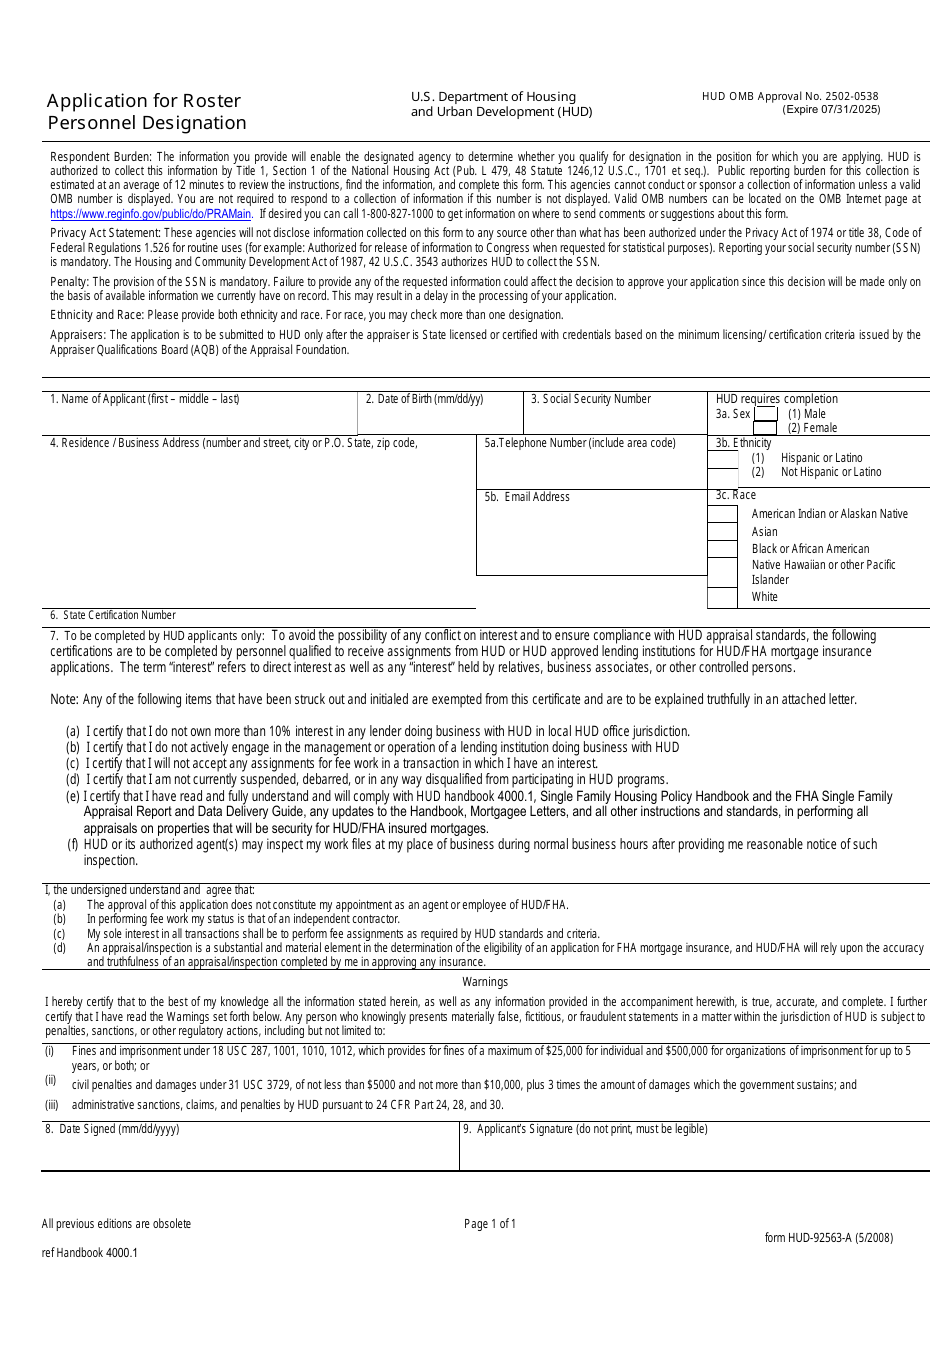 Form HUD-92563-A Application for Roster Personnel Designation, Page 1